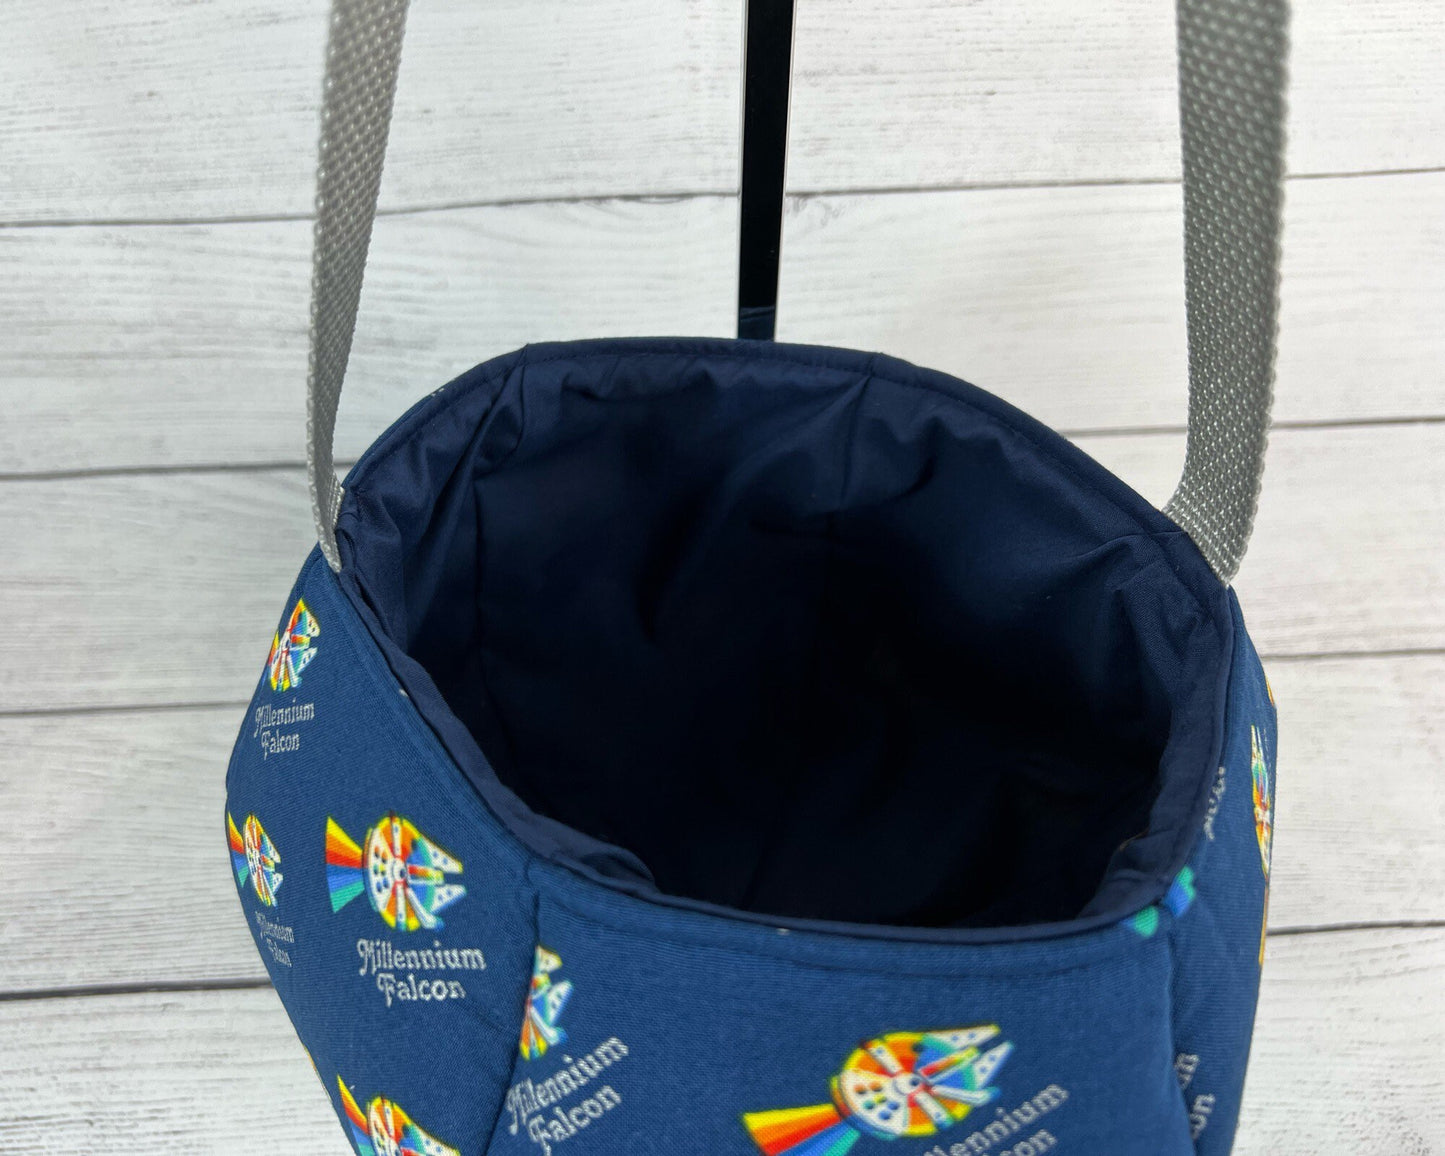 Star Wars Millennium Falcon Tote Bag - Rebels - Rainbow  - New Republic - Blue Tote - Gift - Everyday - Easter - Holiday - Halloween